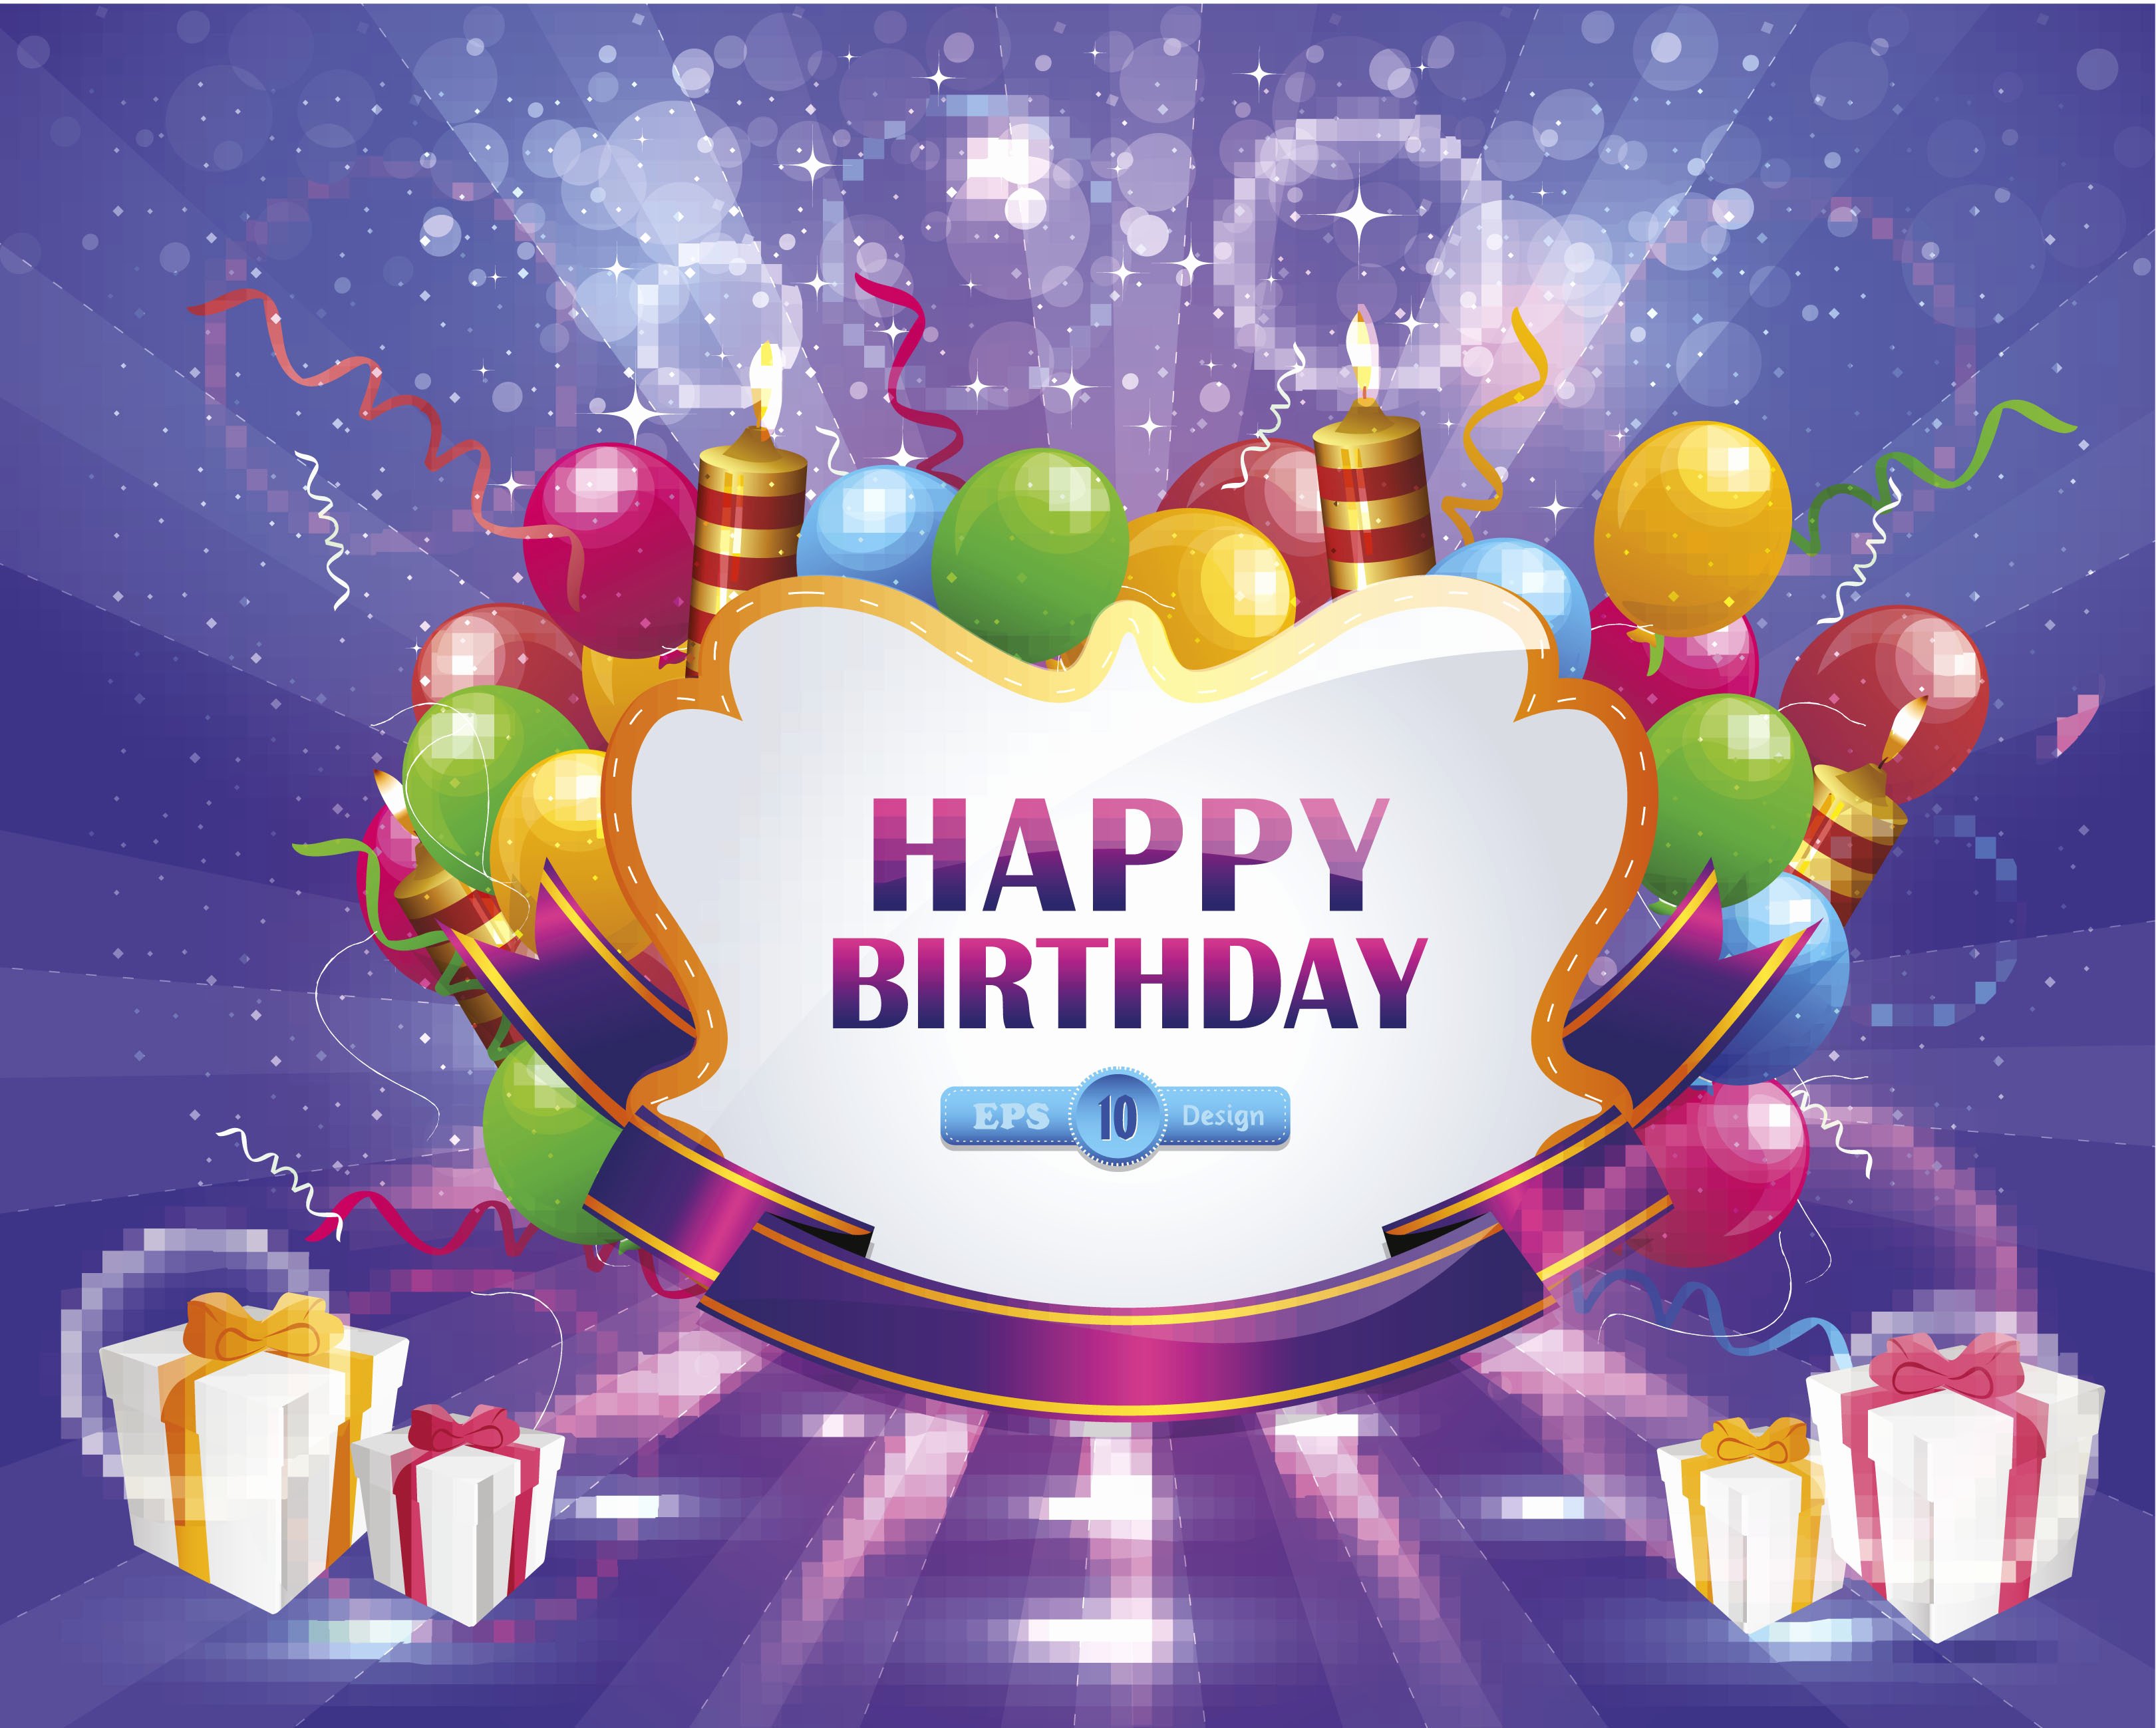 Free Downloads Happy Birthday Images Luxury Beautiful Picture with Congratulations for Birthday